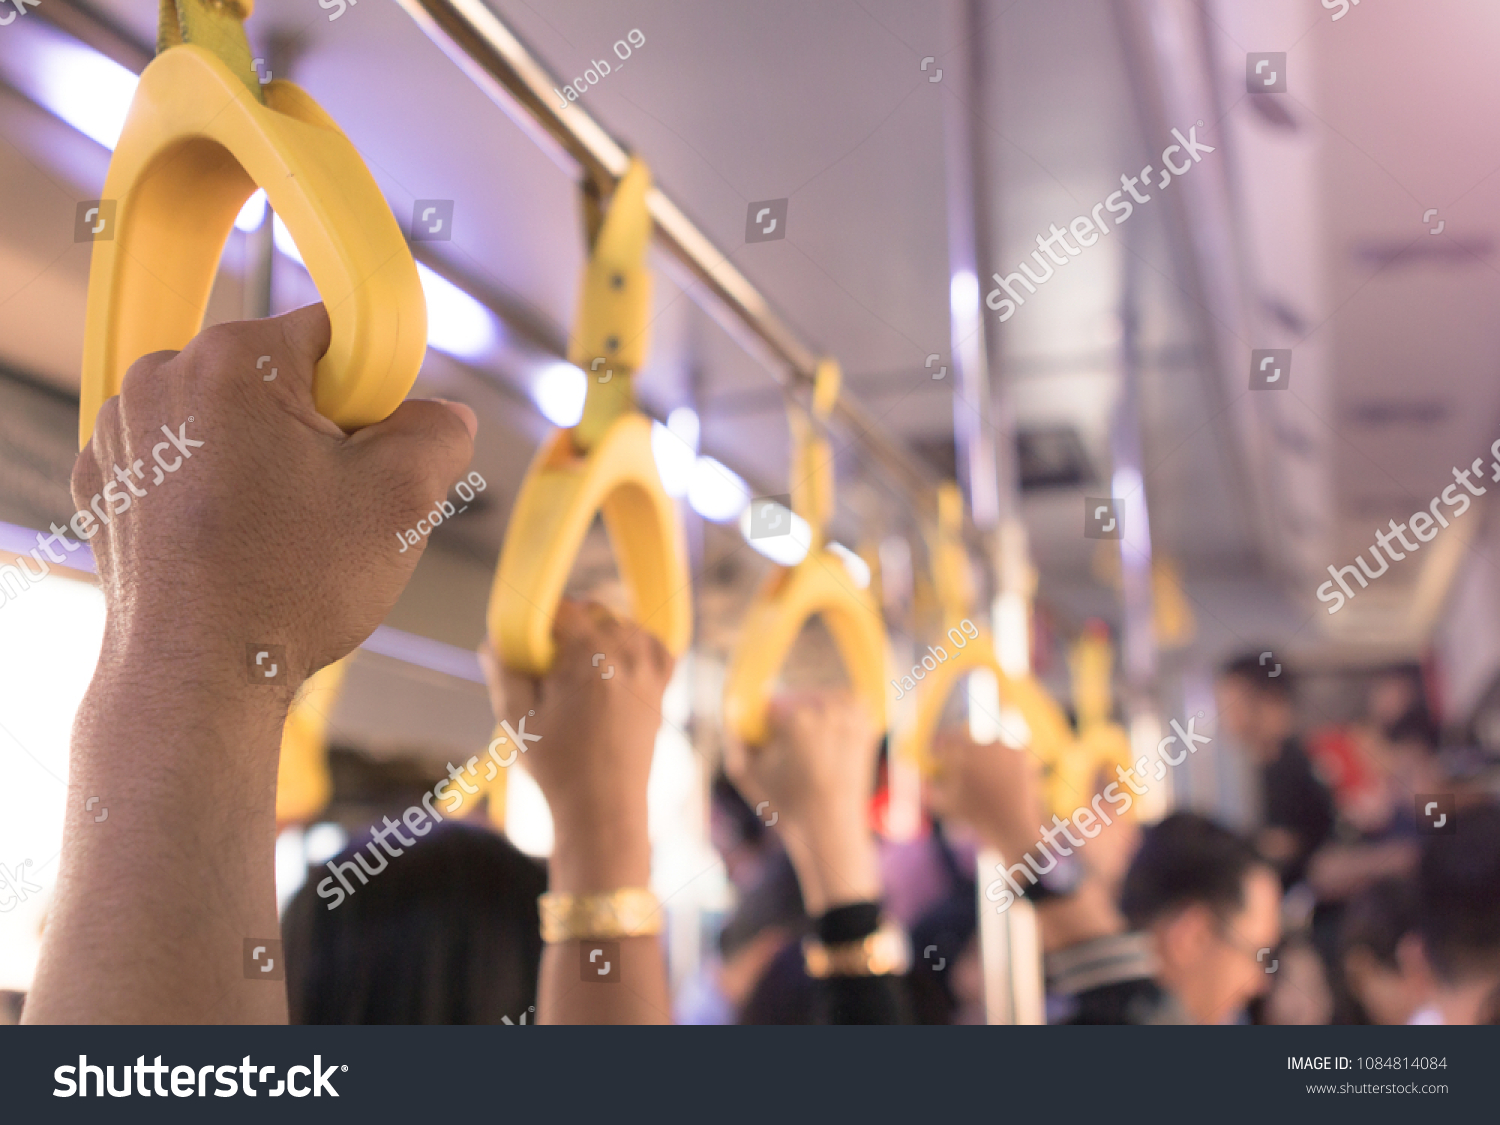 People hand holding yellow handle on the bus  with a large crowd #1084814084